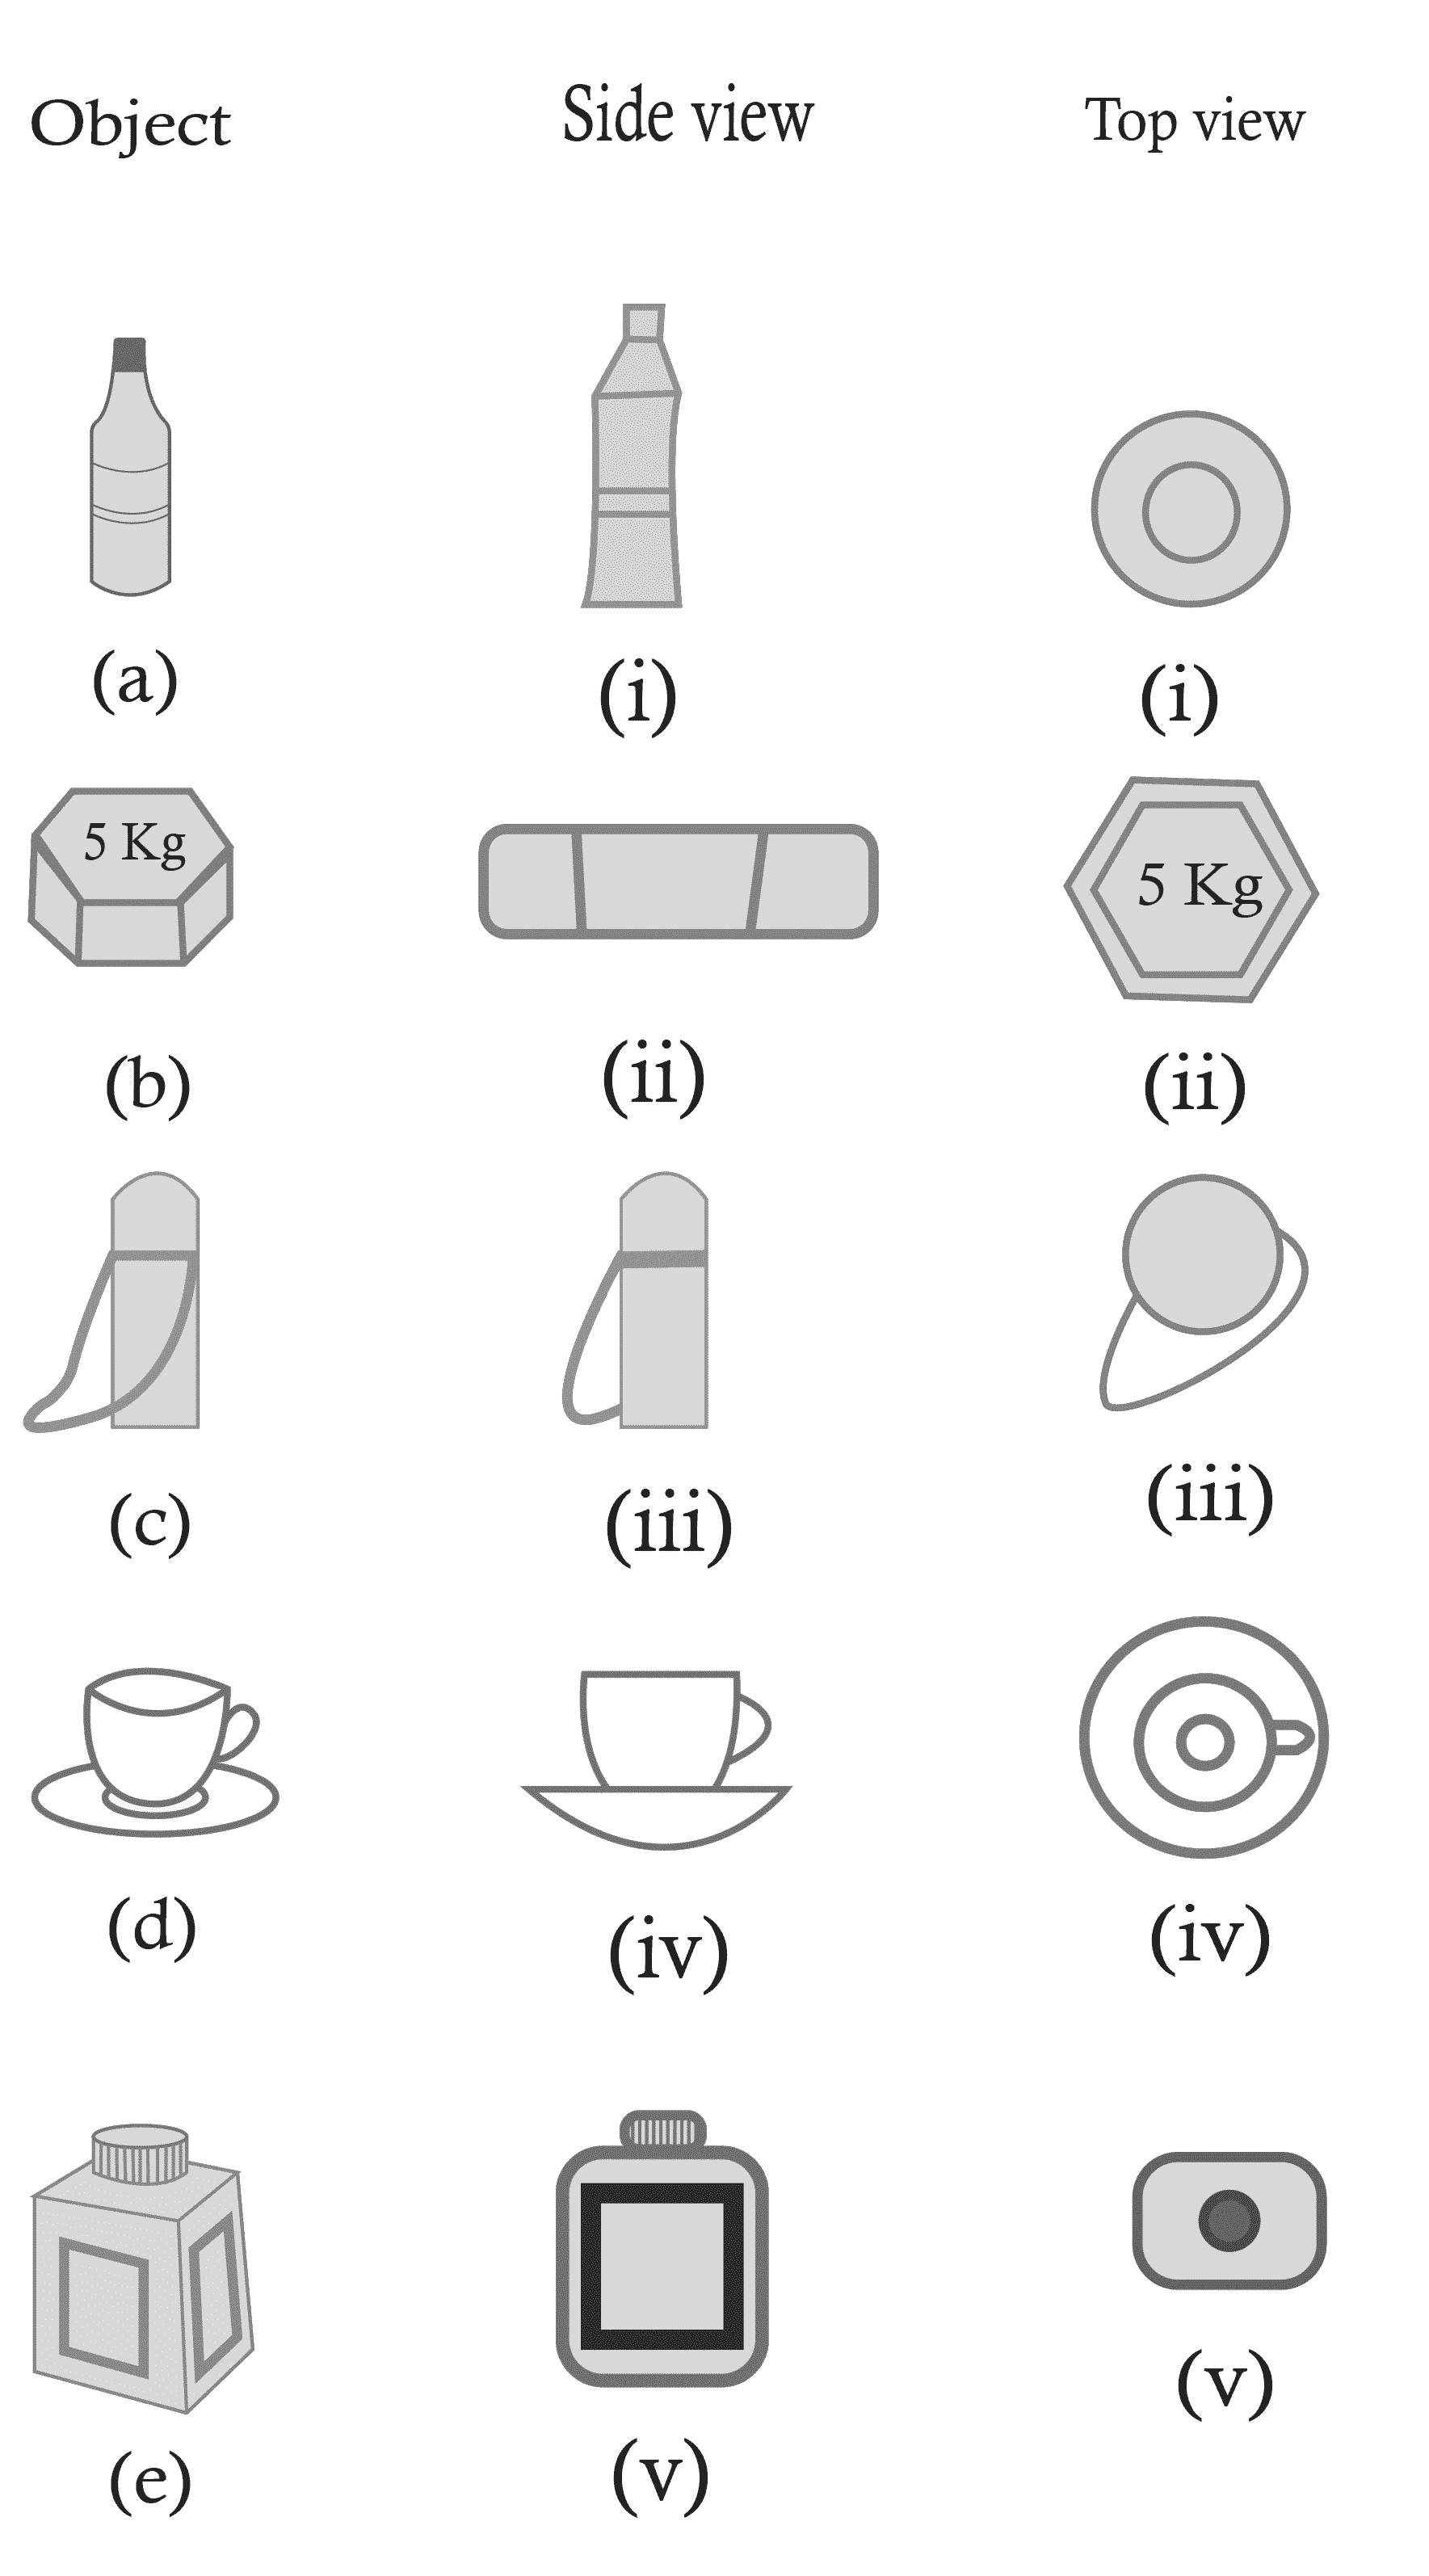 Side and top view of different objects